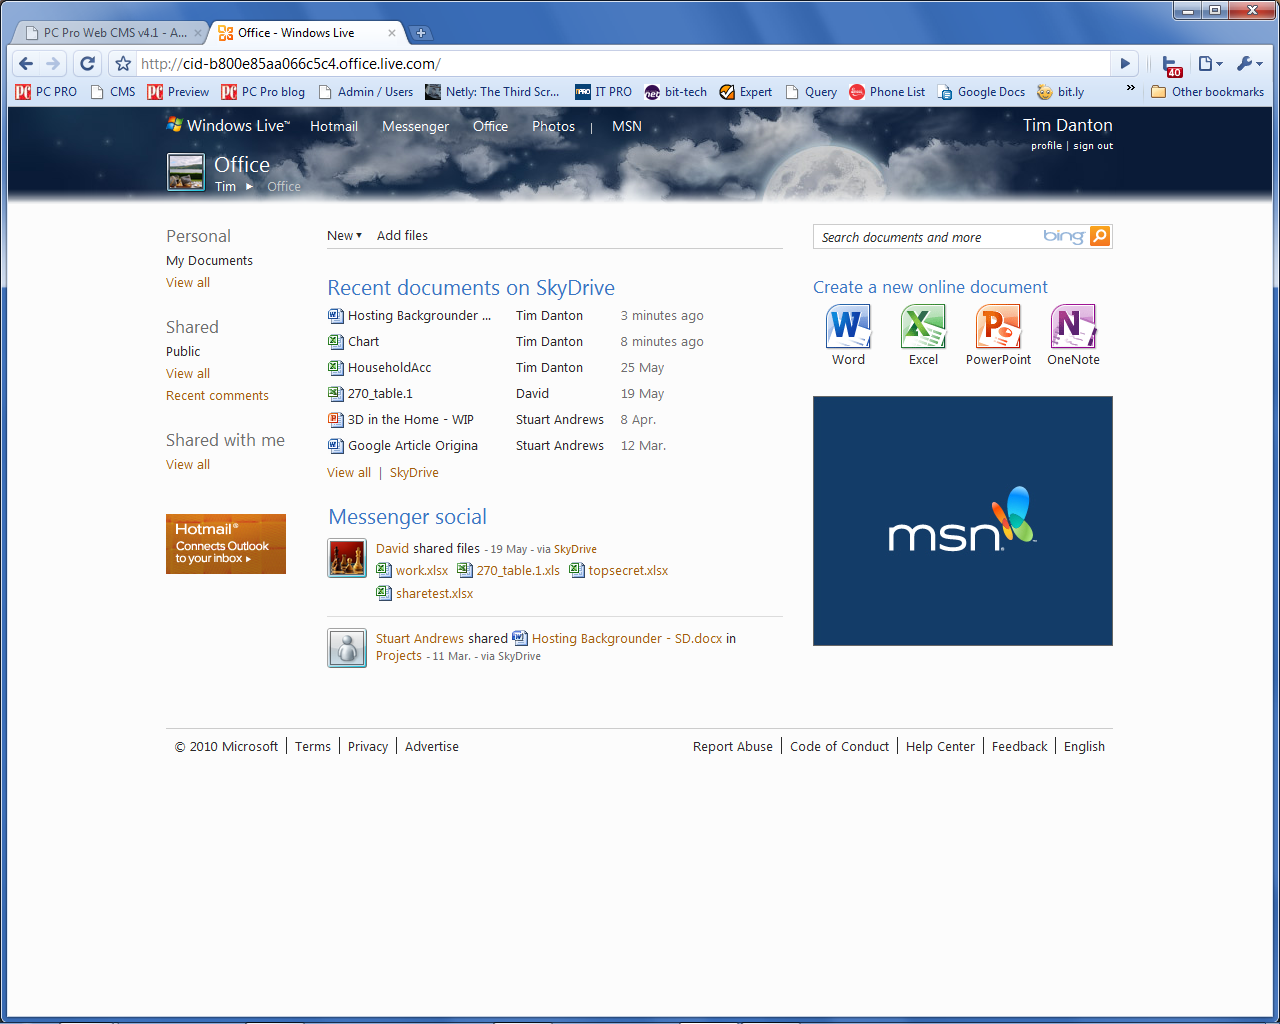 Microsoft Office Web Apps review